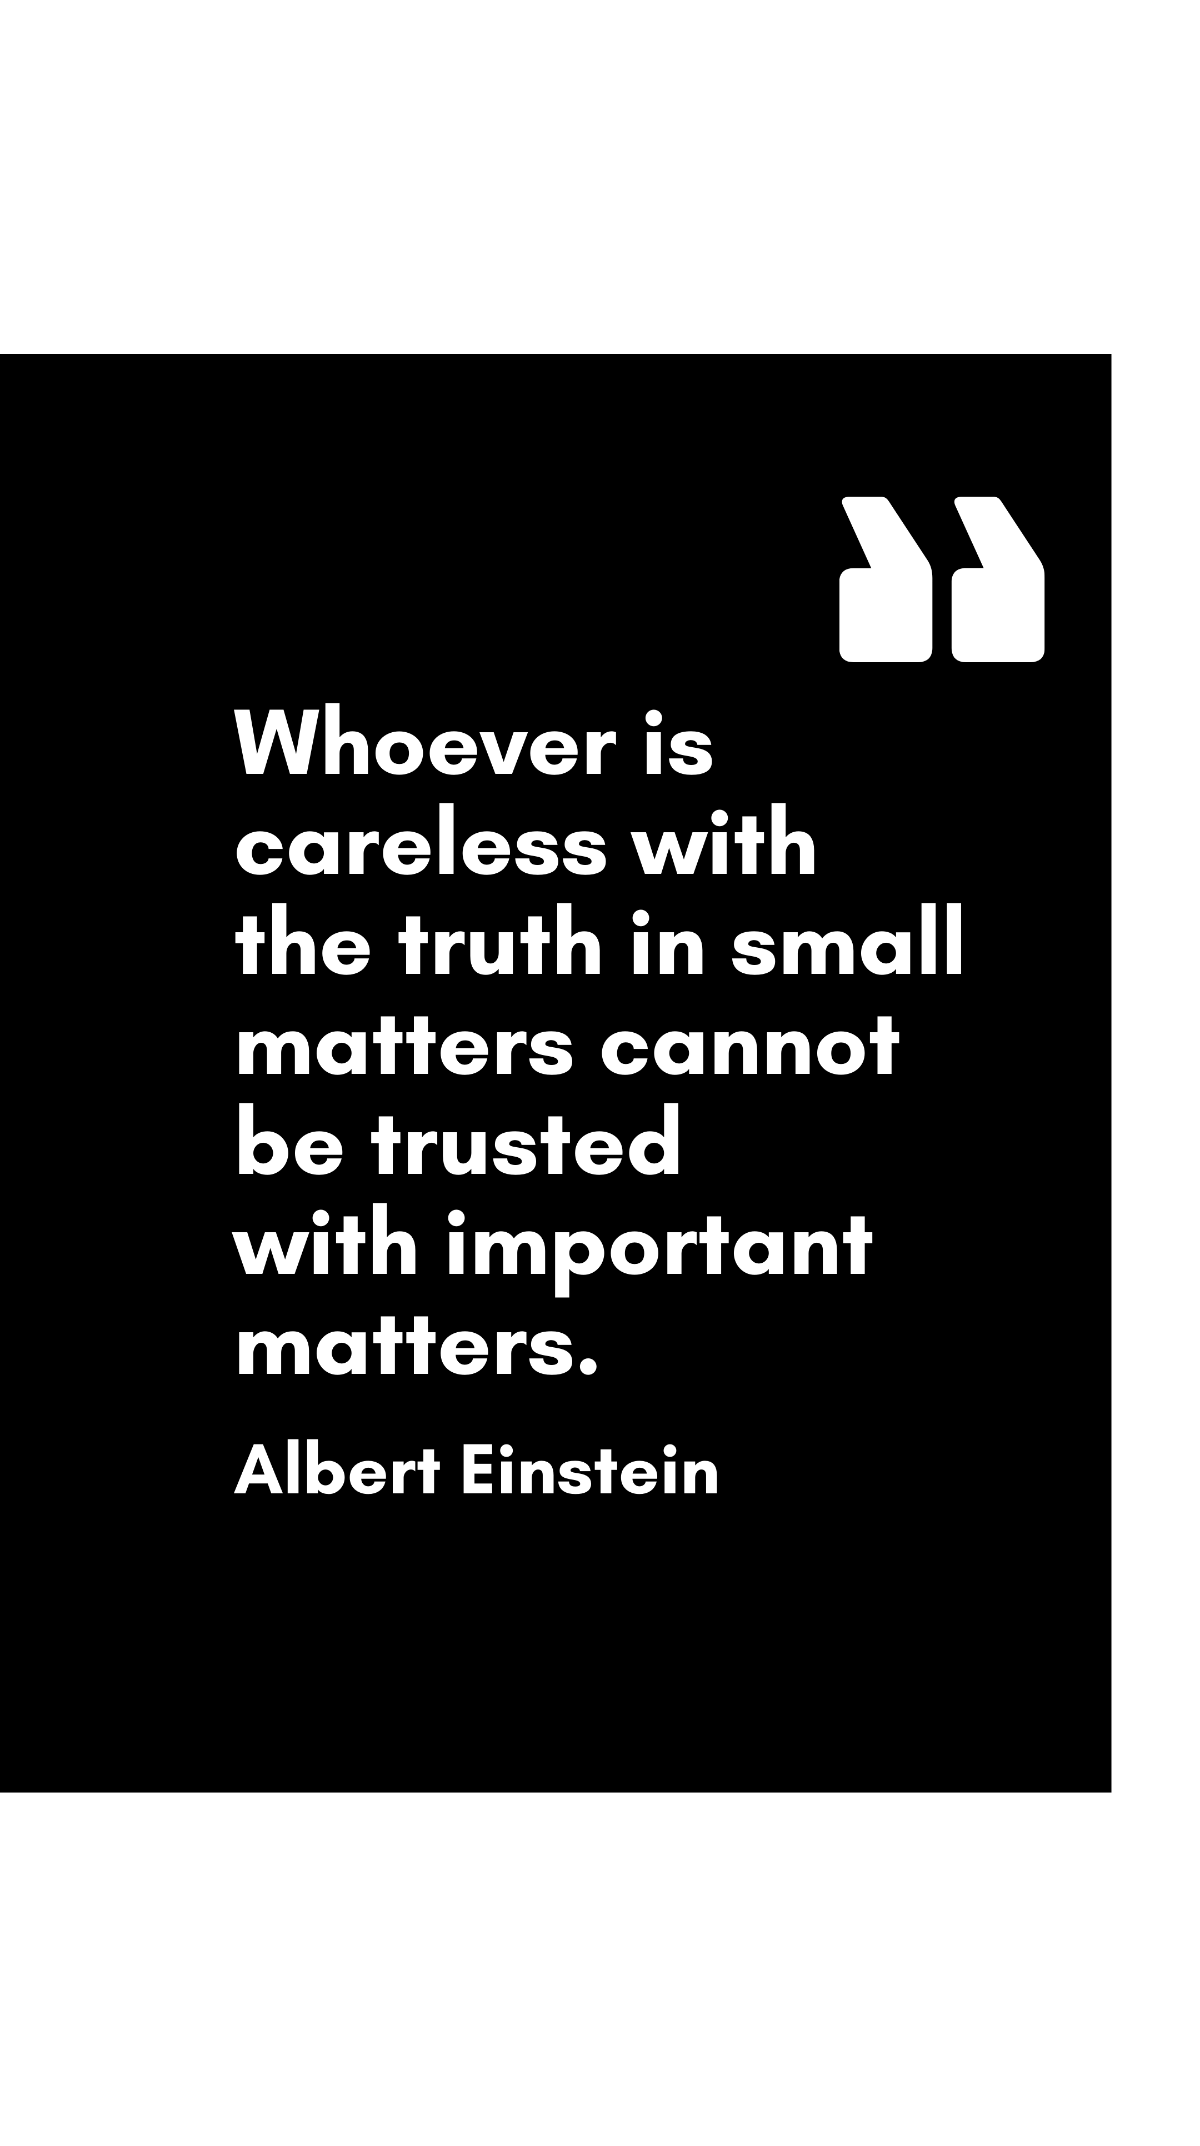 Albert Einstein - Whoever is careless with the truth in small matters cannot be trusted with important matters. Template